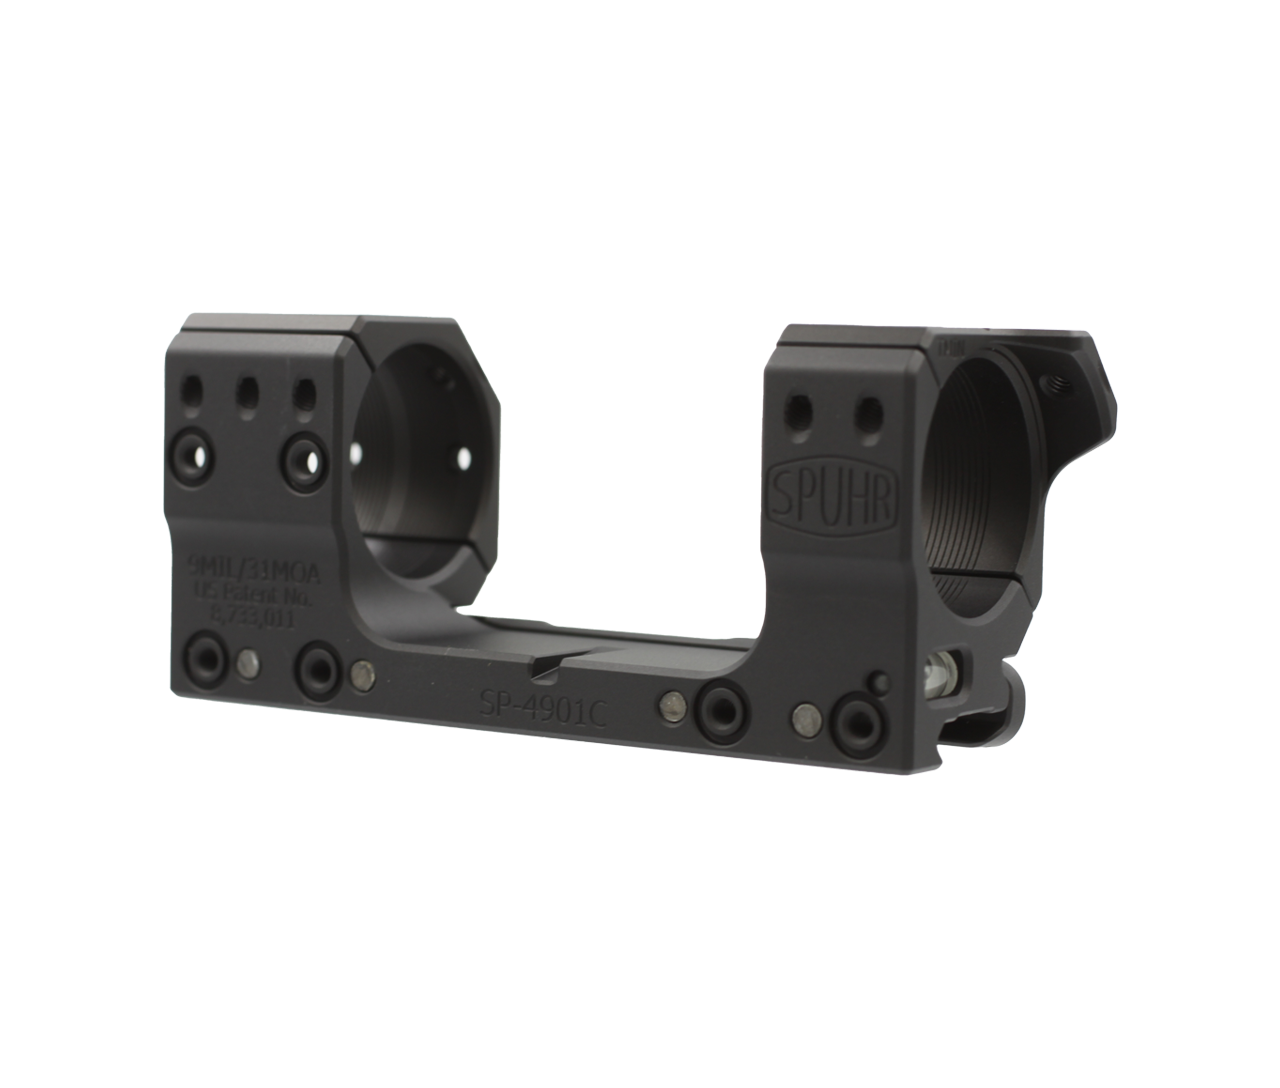 Spuhr SCP-3000: Picatinny Hunting Mount - 30mm, H/1, 0 MOA - Mile High  Shooting Accessories